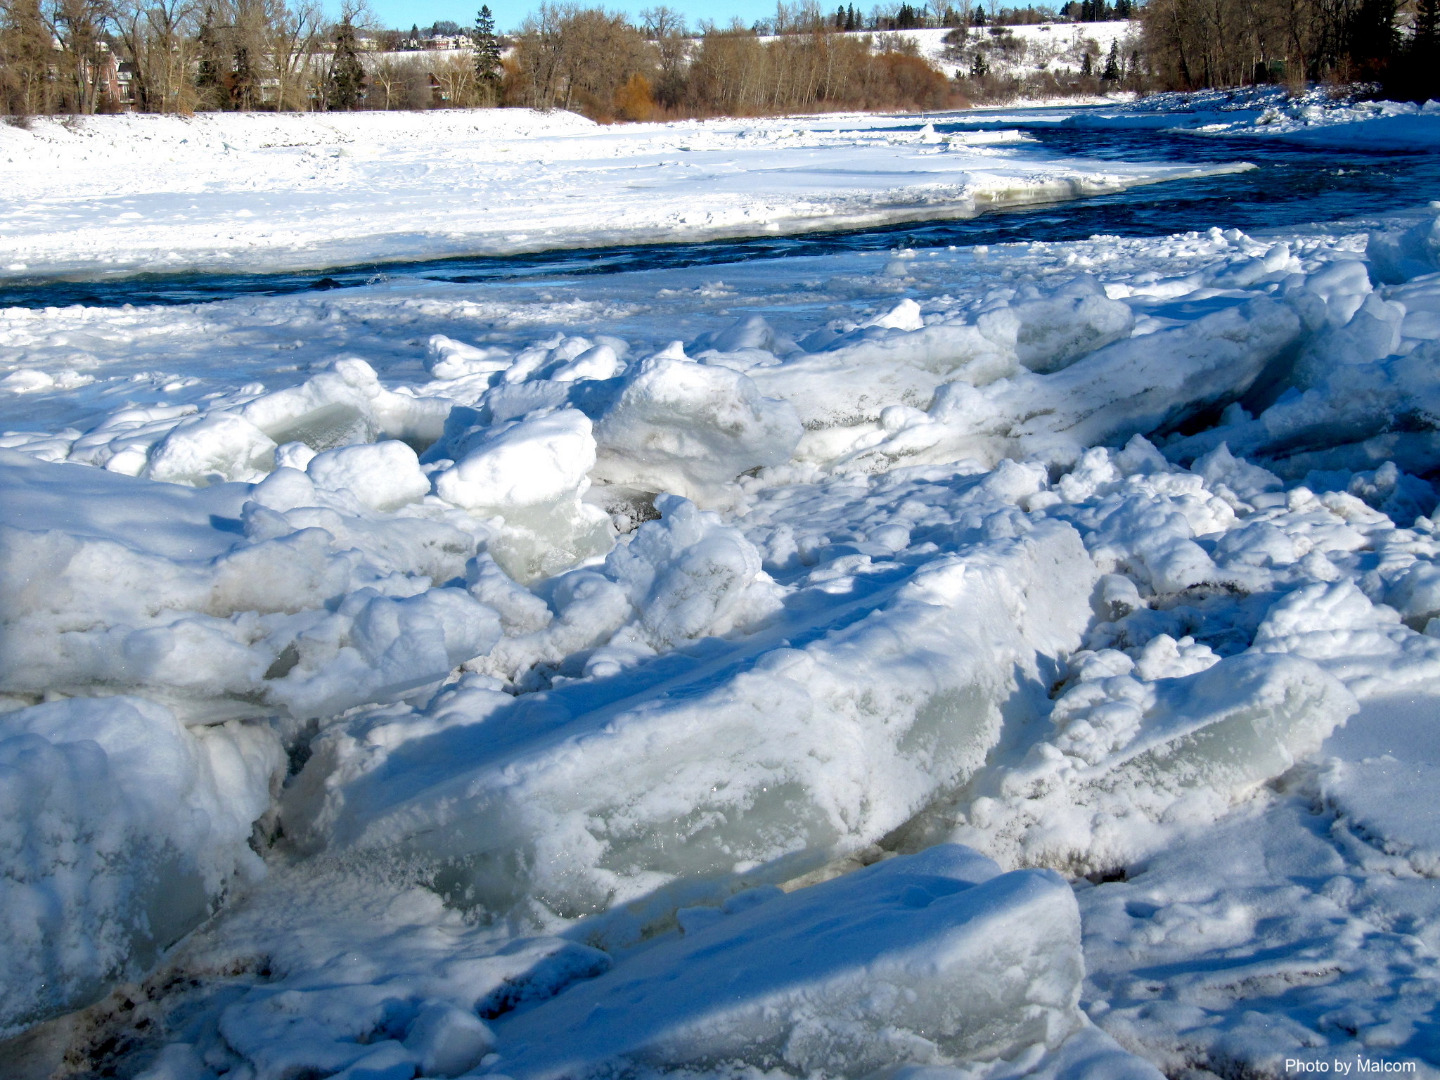 Article - Future of Frozen Flows River Ice Projections for a Warming World